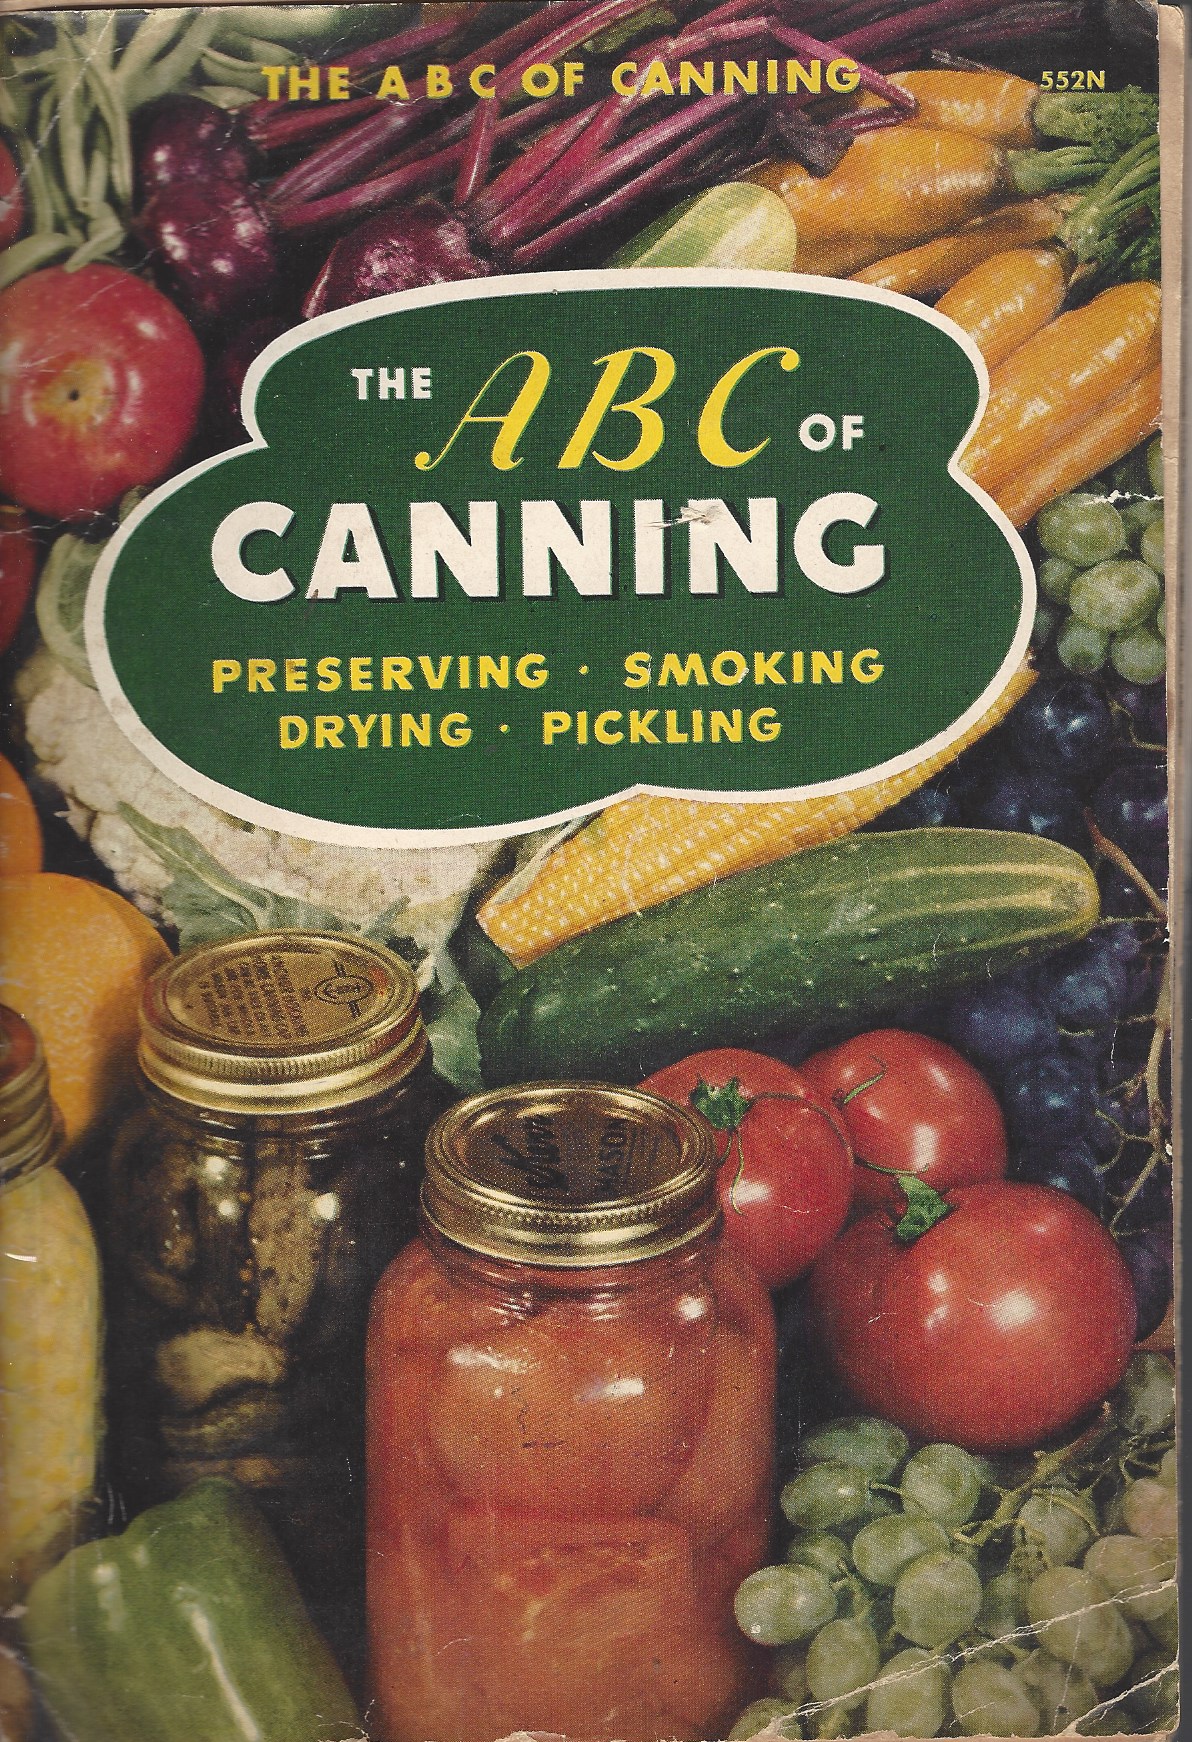 BEROLZHEIMER RUTH - ABC of Canning: Preserving, Drying, Smoking and Pickling of Foods.